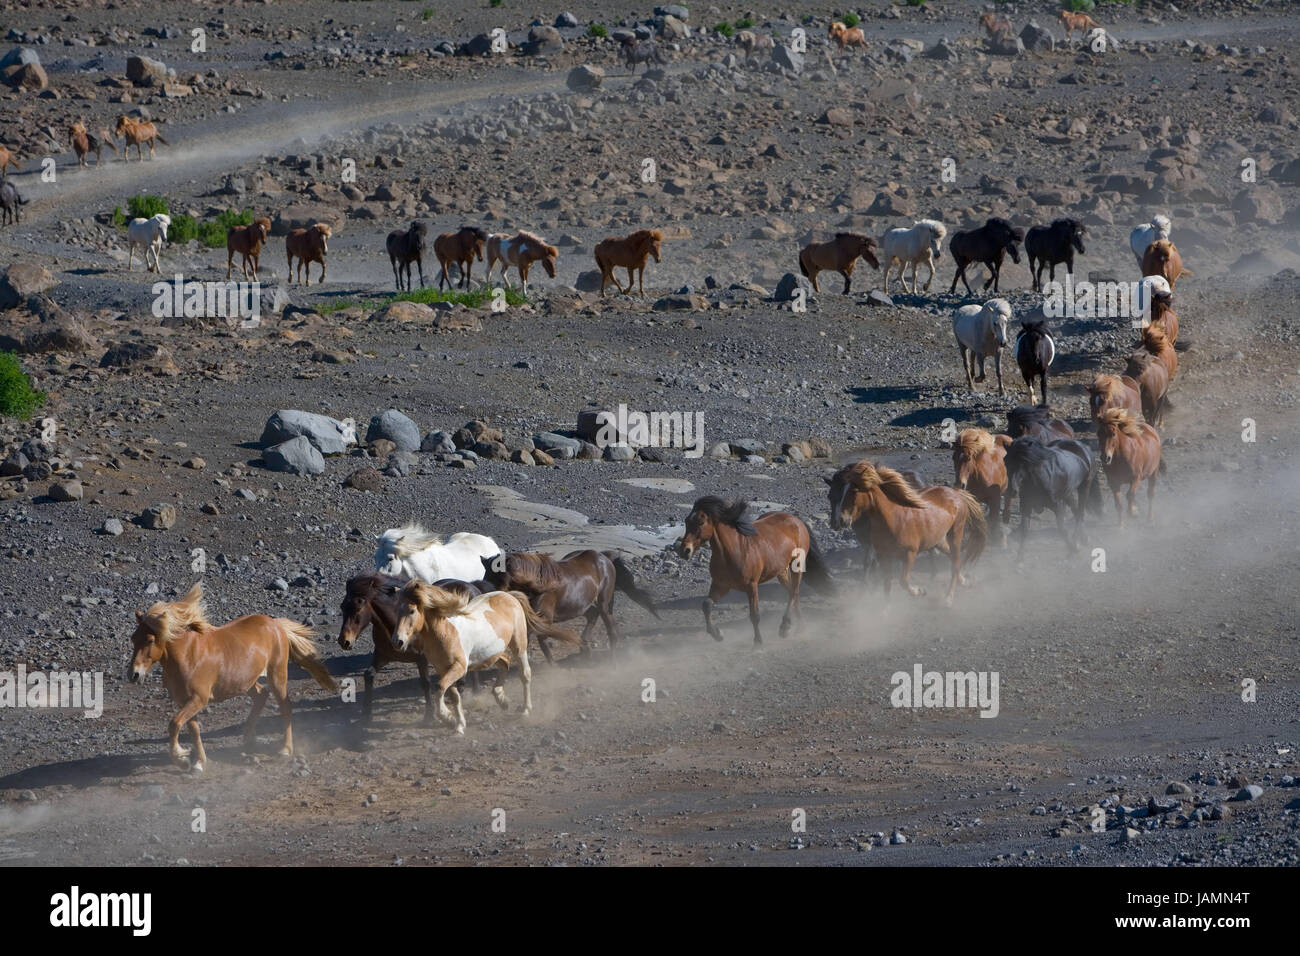 Iceland,Akureyri,Iceland horses,focuses,run,ride out one after the other,Iceland,destination,animals,mammals,benefit animals,scenery,scanty,stony,rocky,tourism,excursion,scanty,drily,horse's focuses,horses,dust,dusty,dryness,wild animals,wild horses, Stock Photo